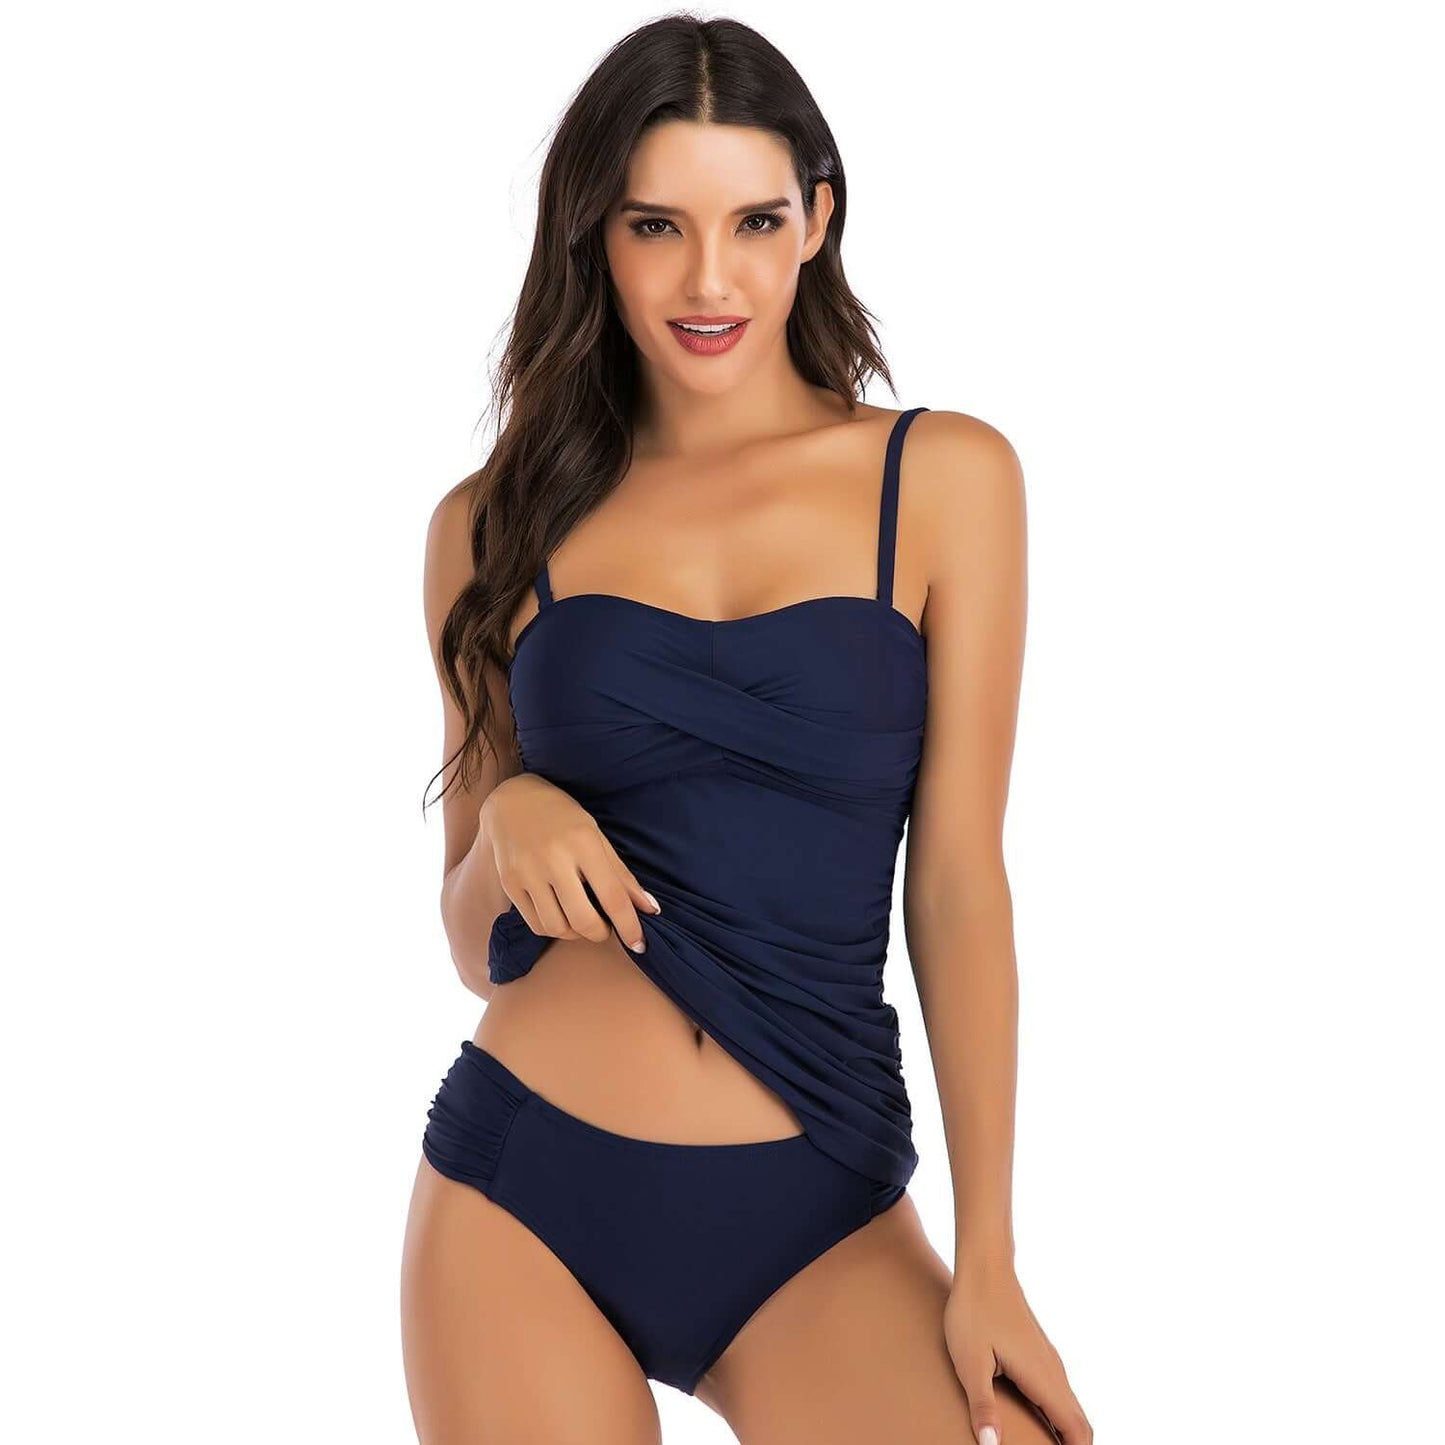 Covered belly split swimsuit ladies conservative